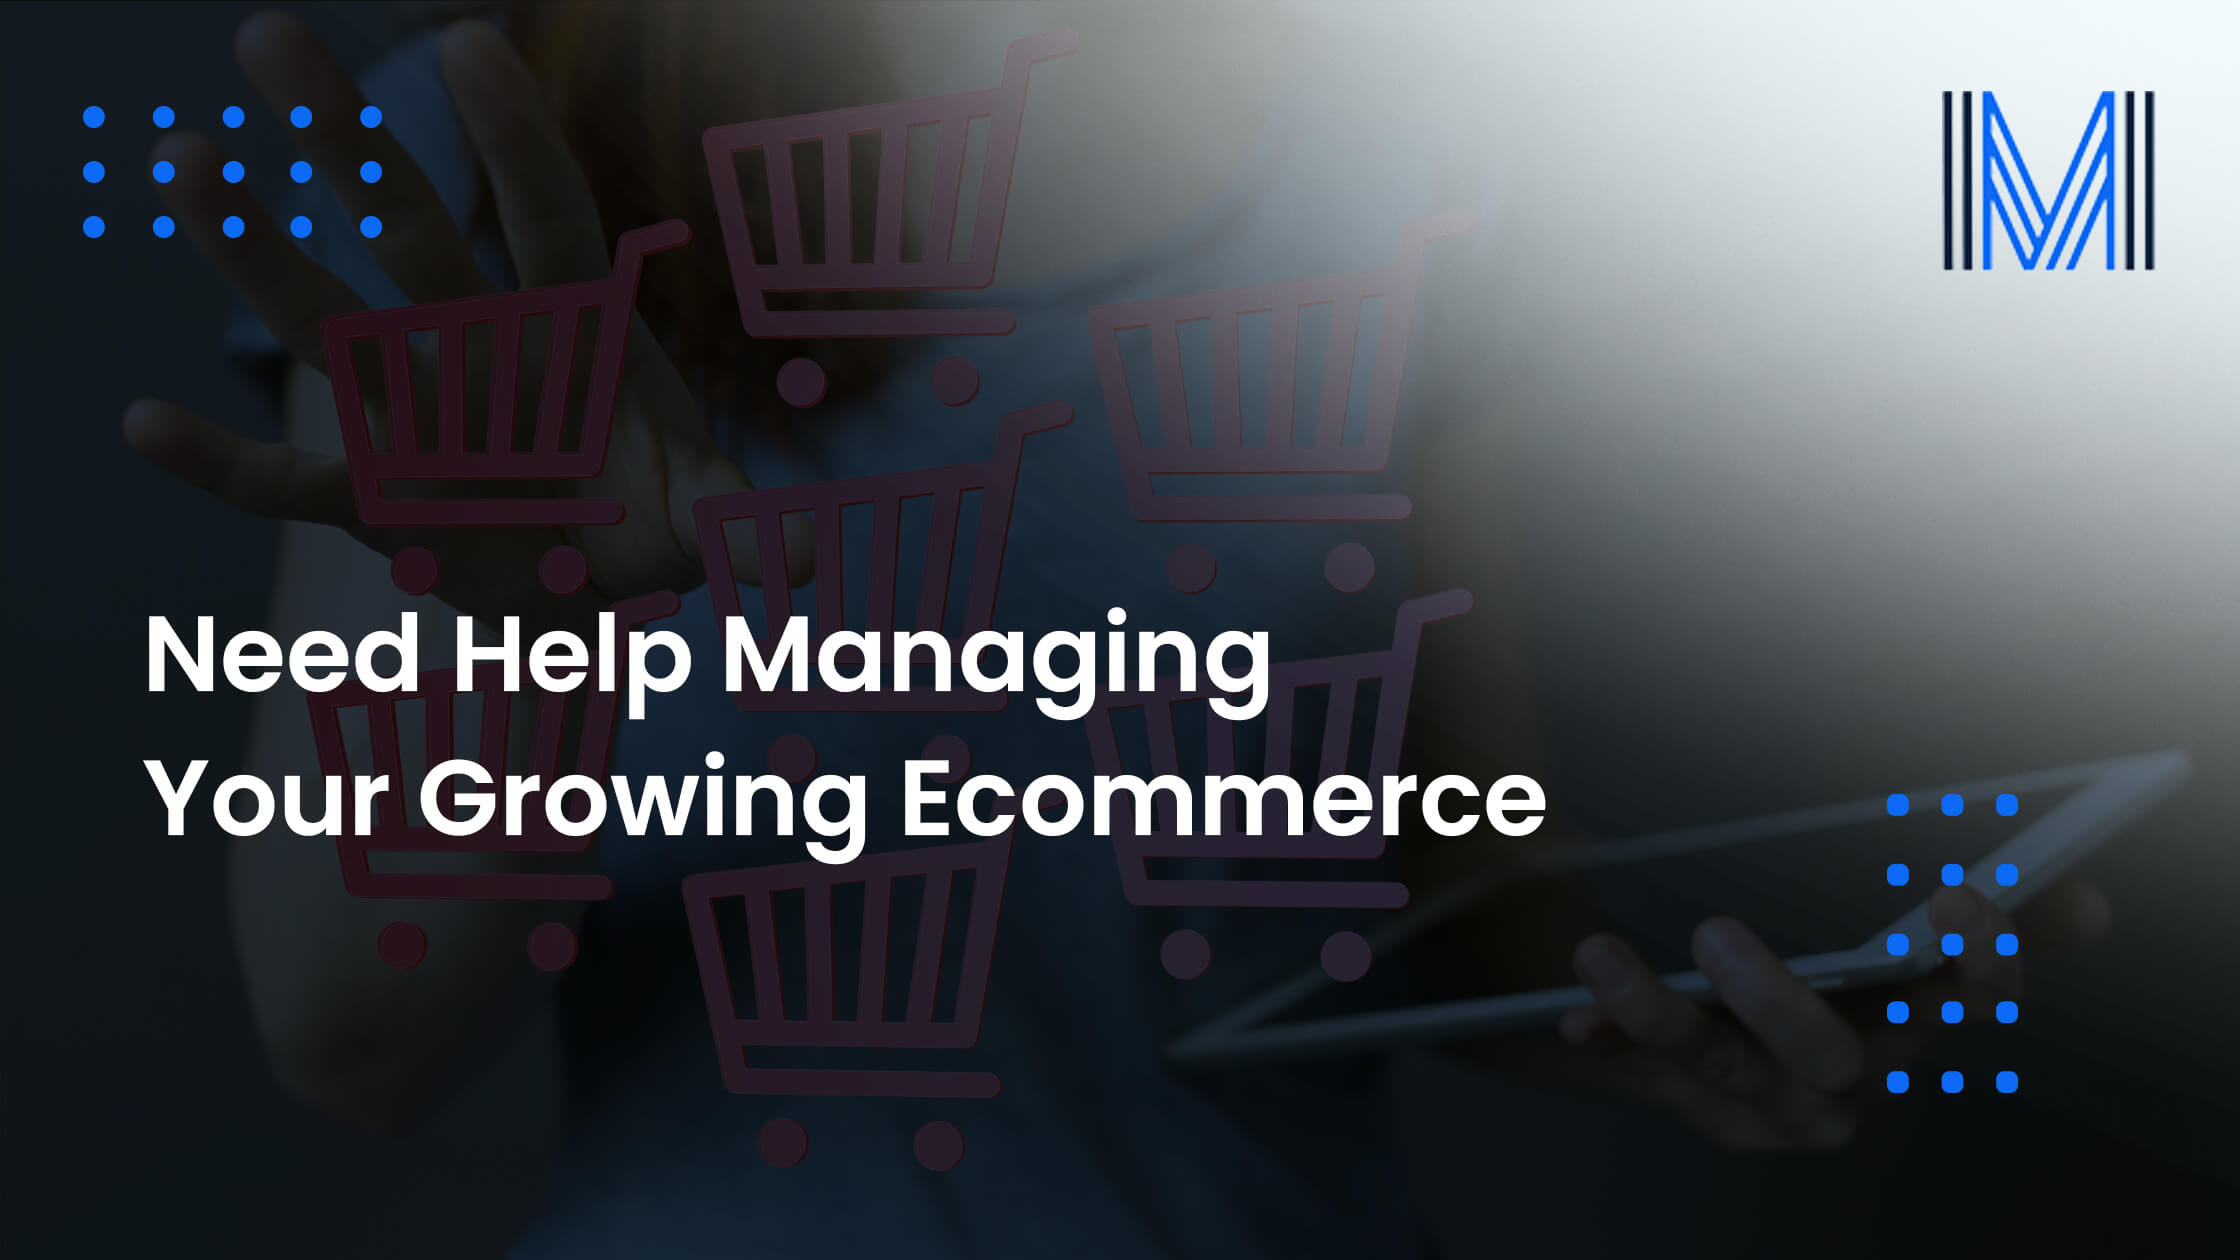 Need Help Managing Your Growing Ecommerce